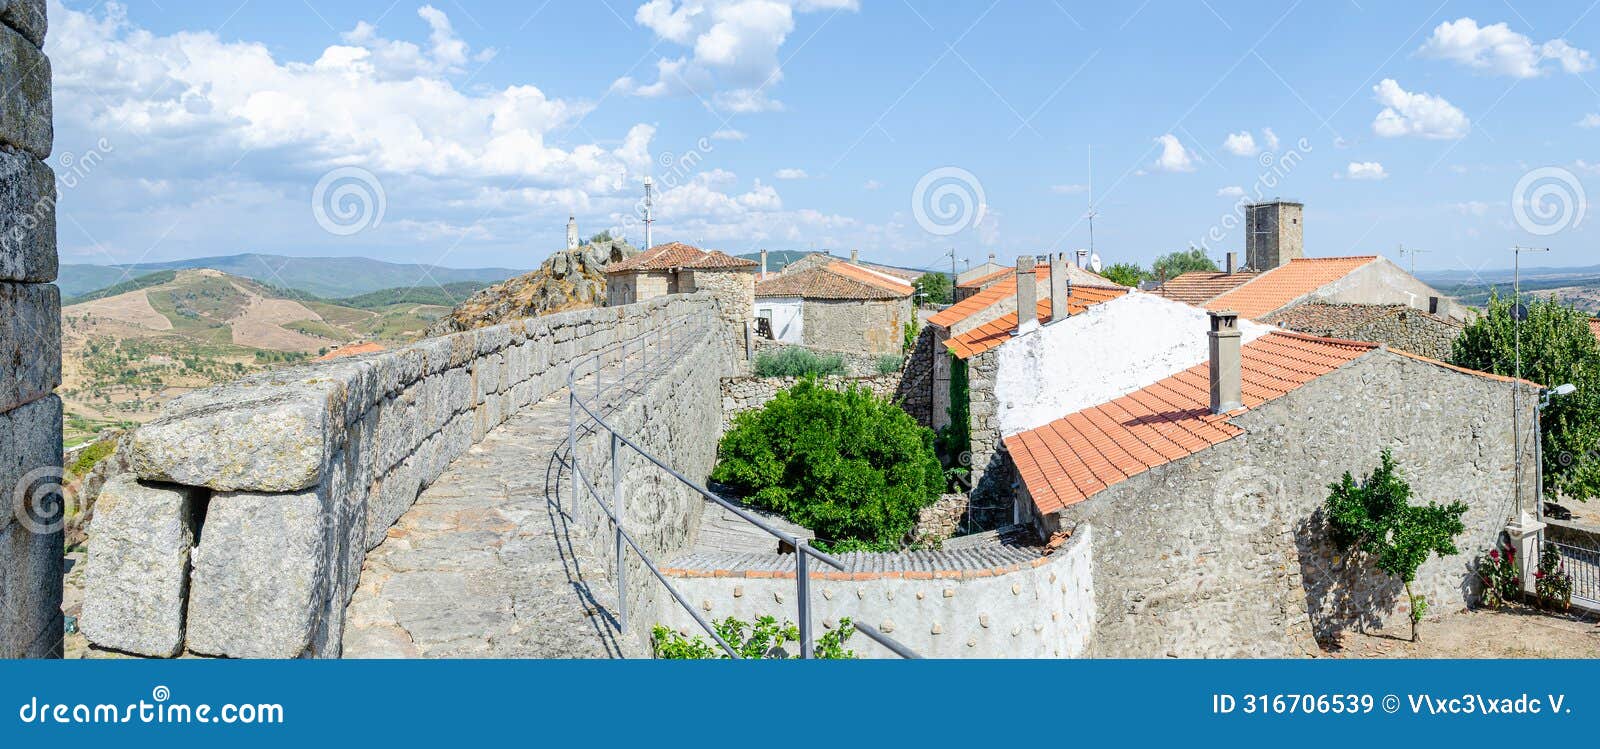 panoramic view of penamacor, a medieval village in the beira baixa region of portugal